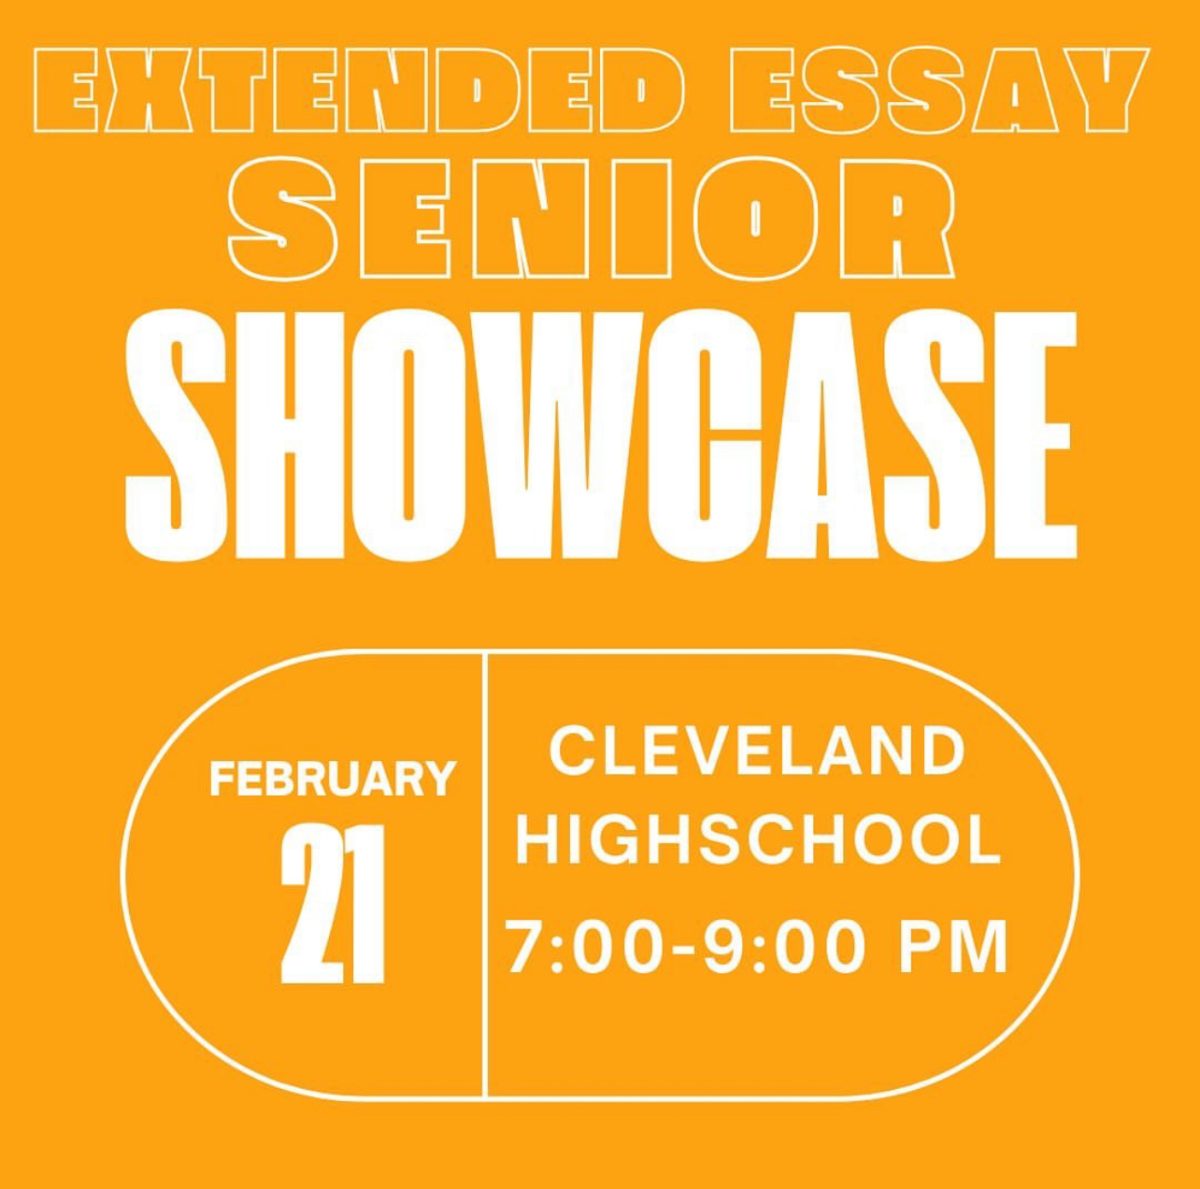 The Extended Essay Showcase on Feb. 21 will begin at 7 p.m. and finish at 9 p.m. 